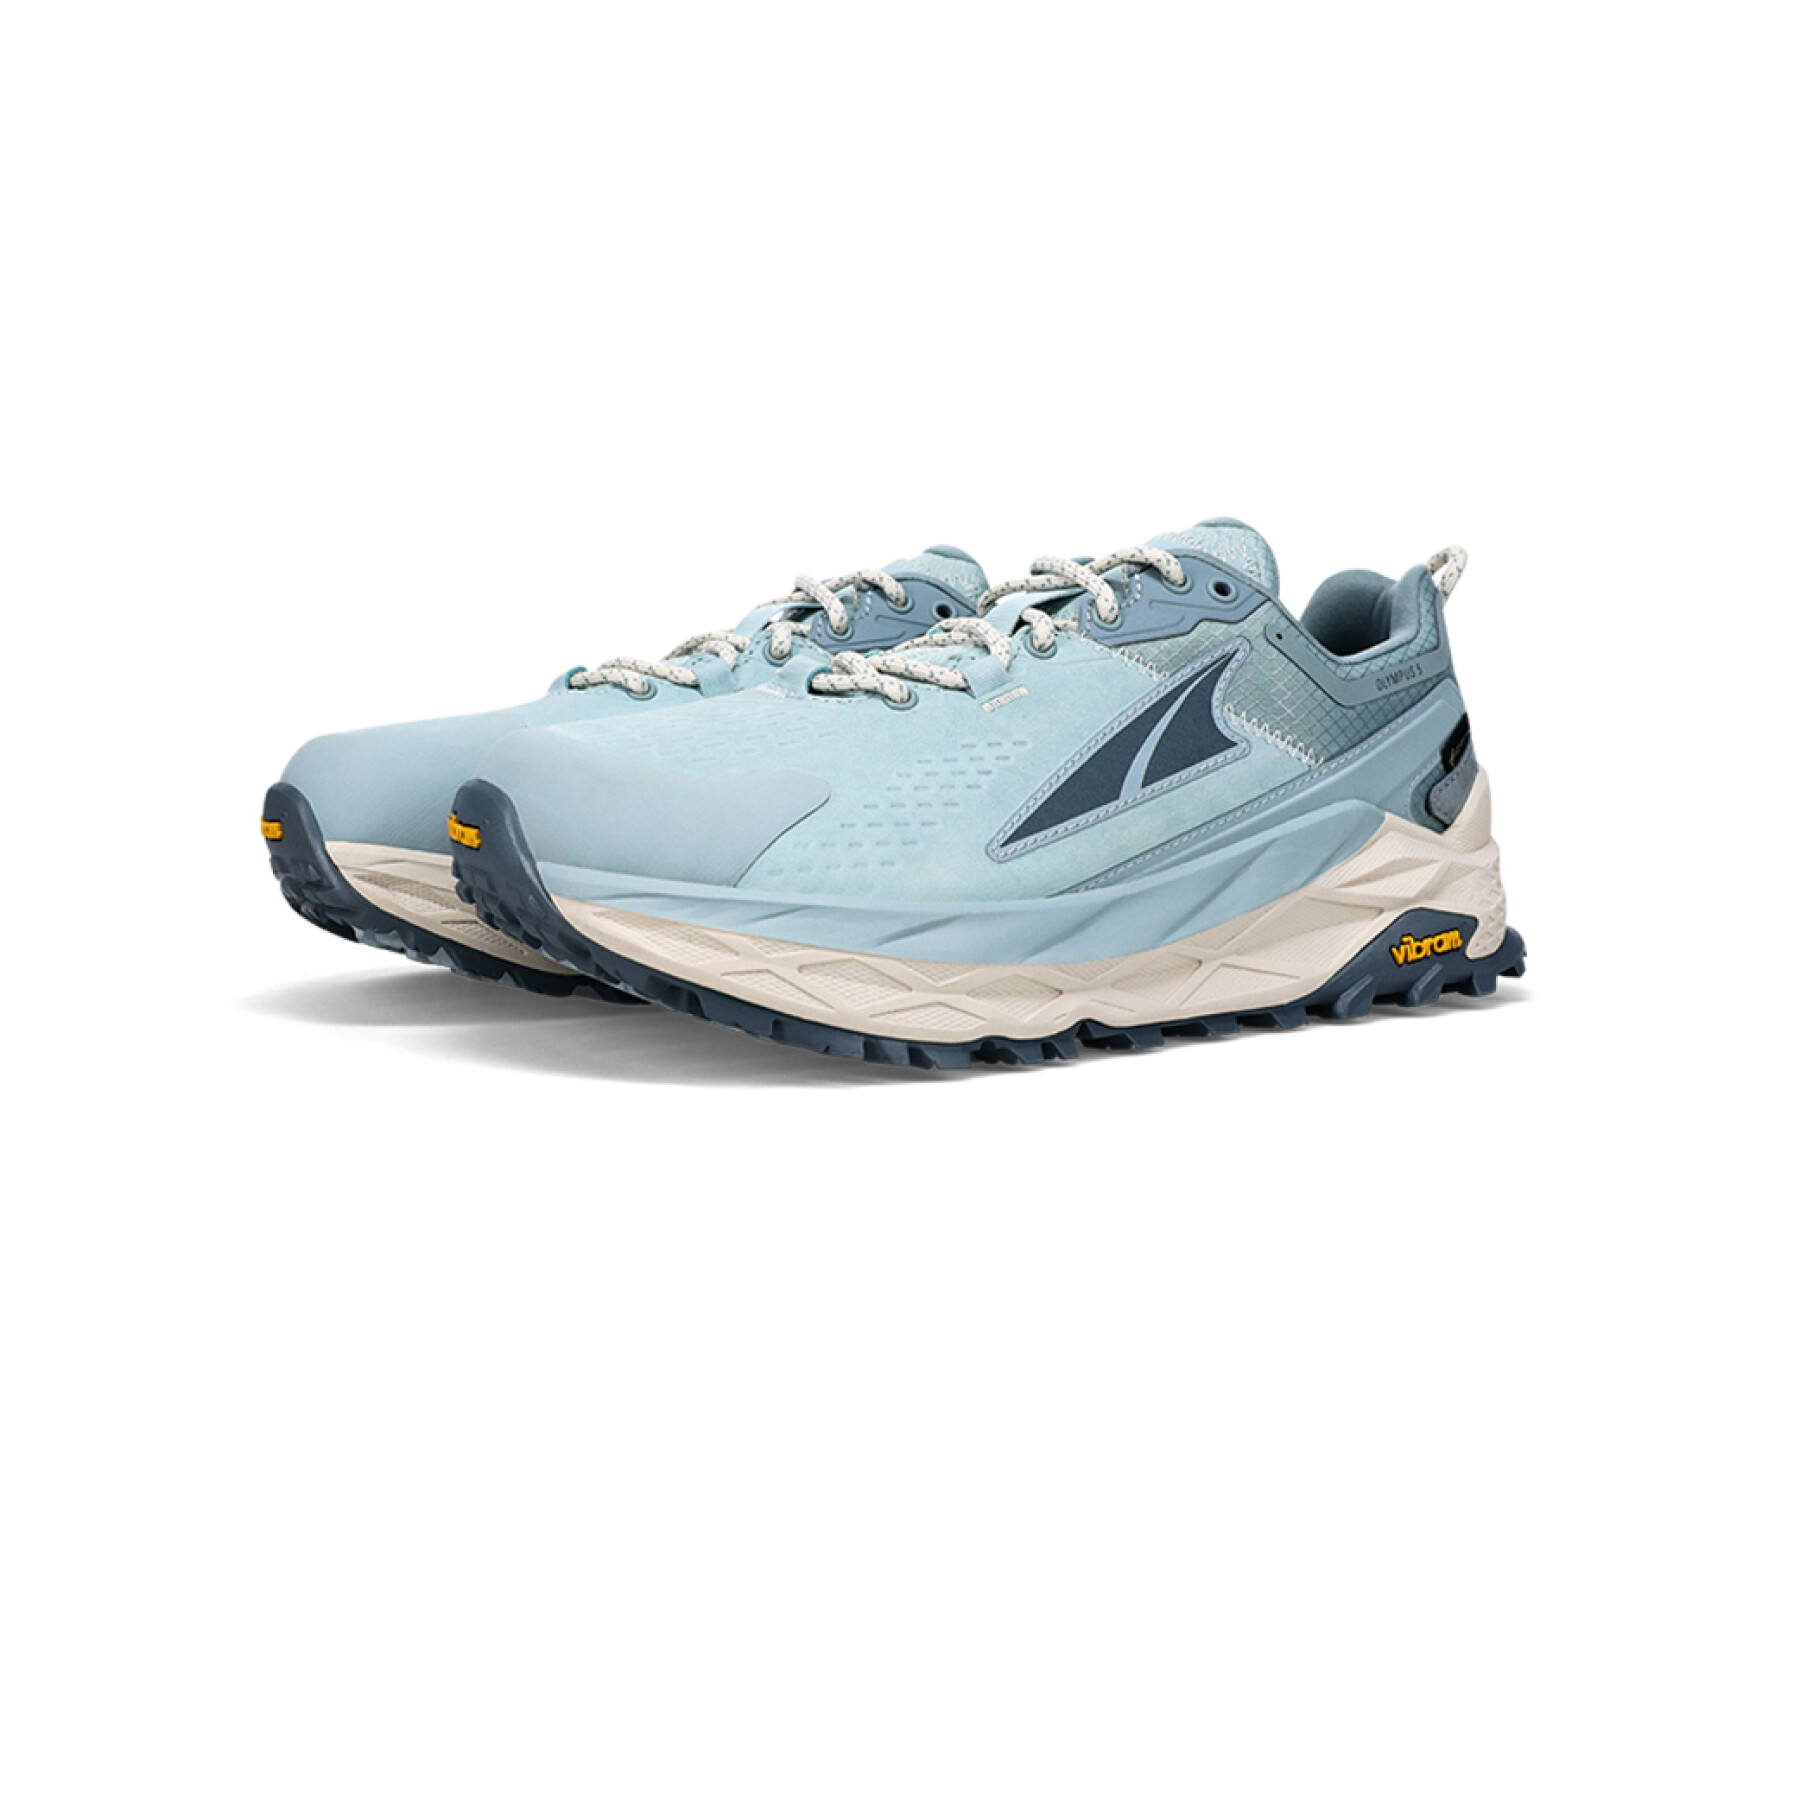 Women's hiking shoes Altra Olympus 5 Low Gore-Tex